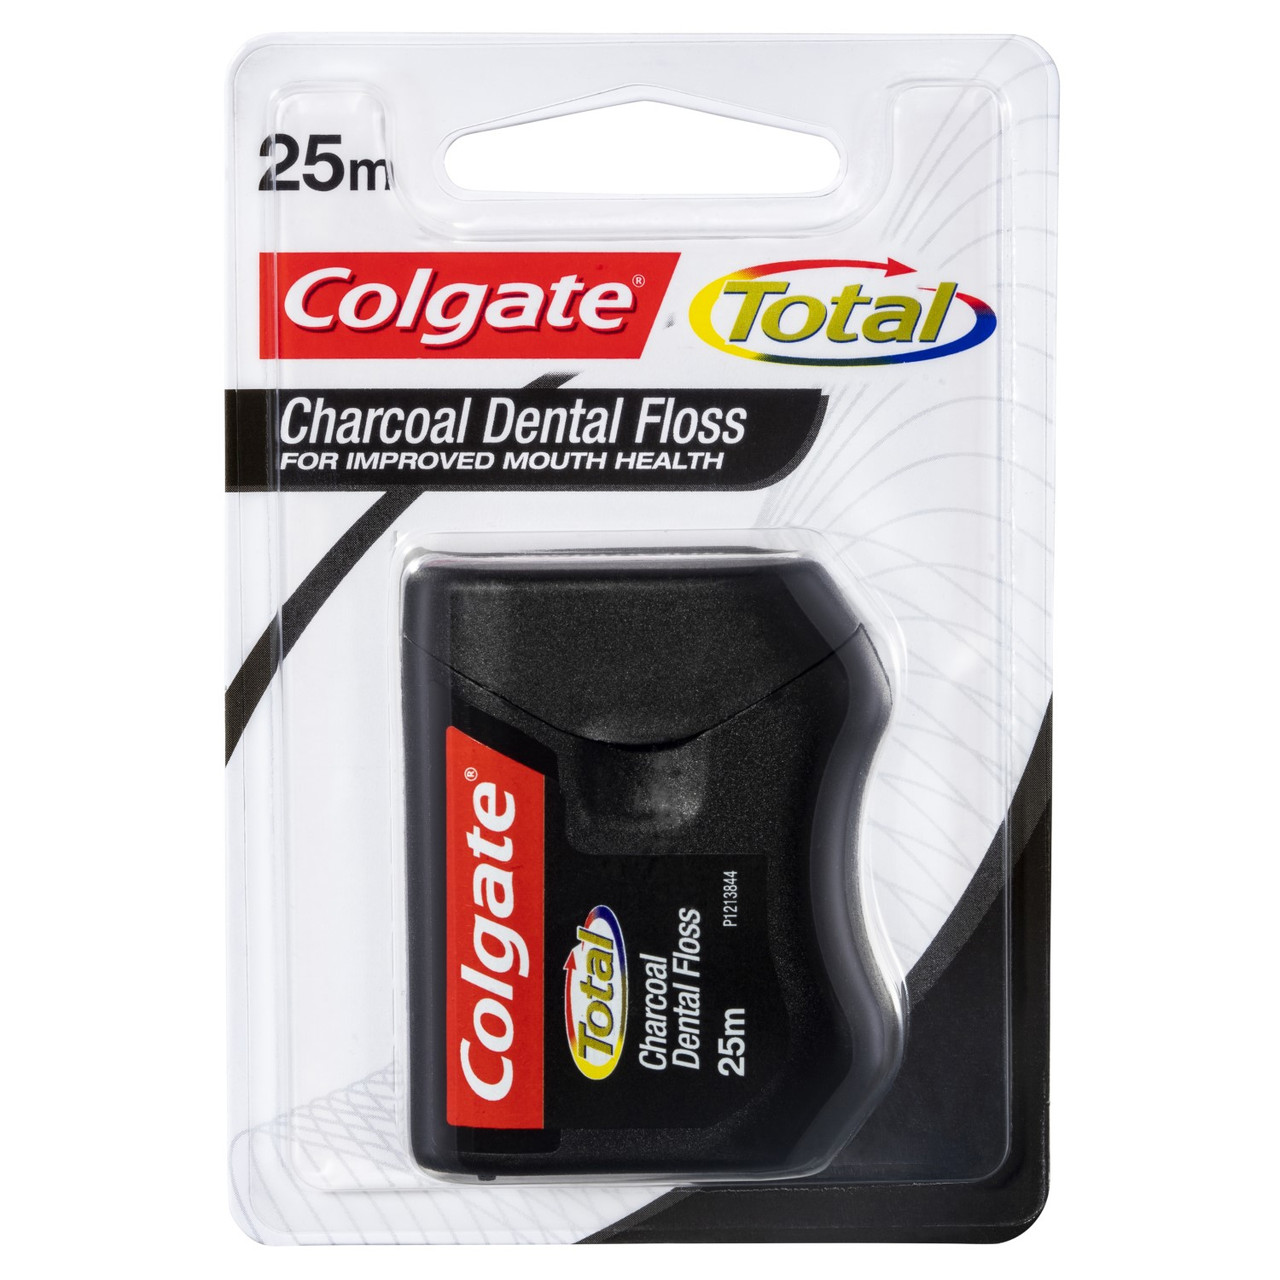 Colgate Total Charcoal Care Floss 25m - Pharmacy 4 Less